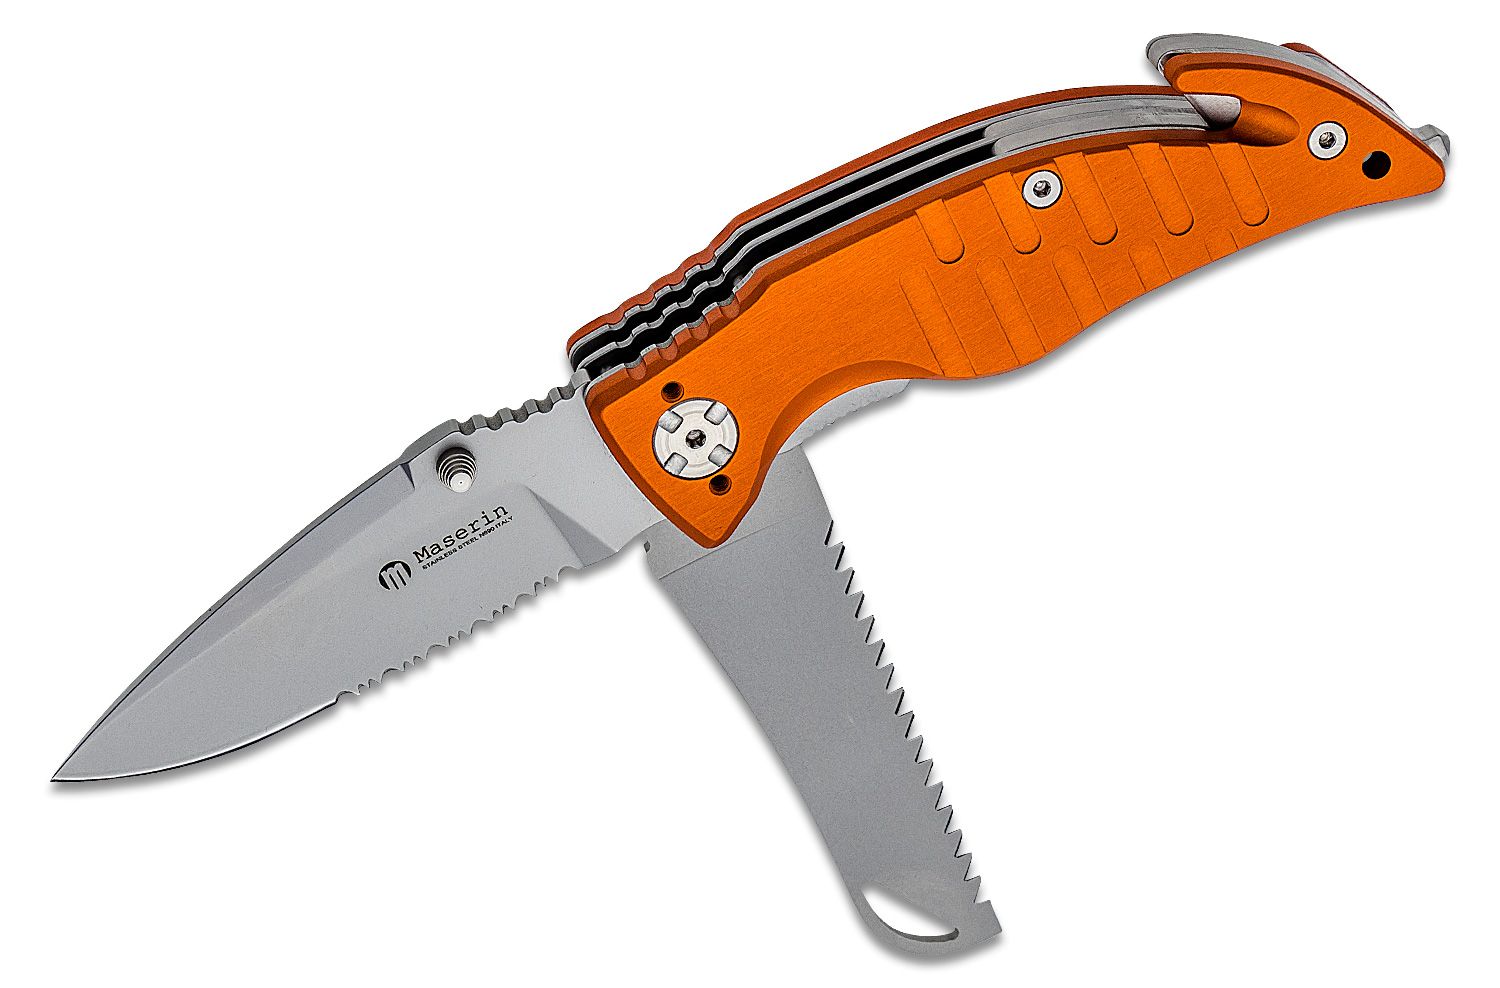 BSRK-B6) Pelican Dual Function Safety Knife, w/6 Blades, Boxed